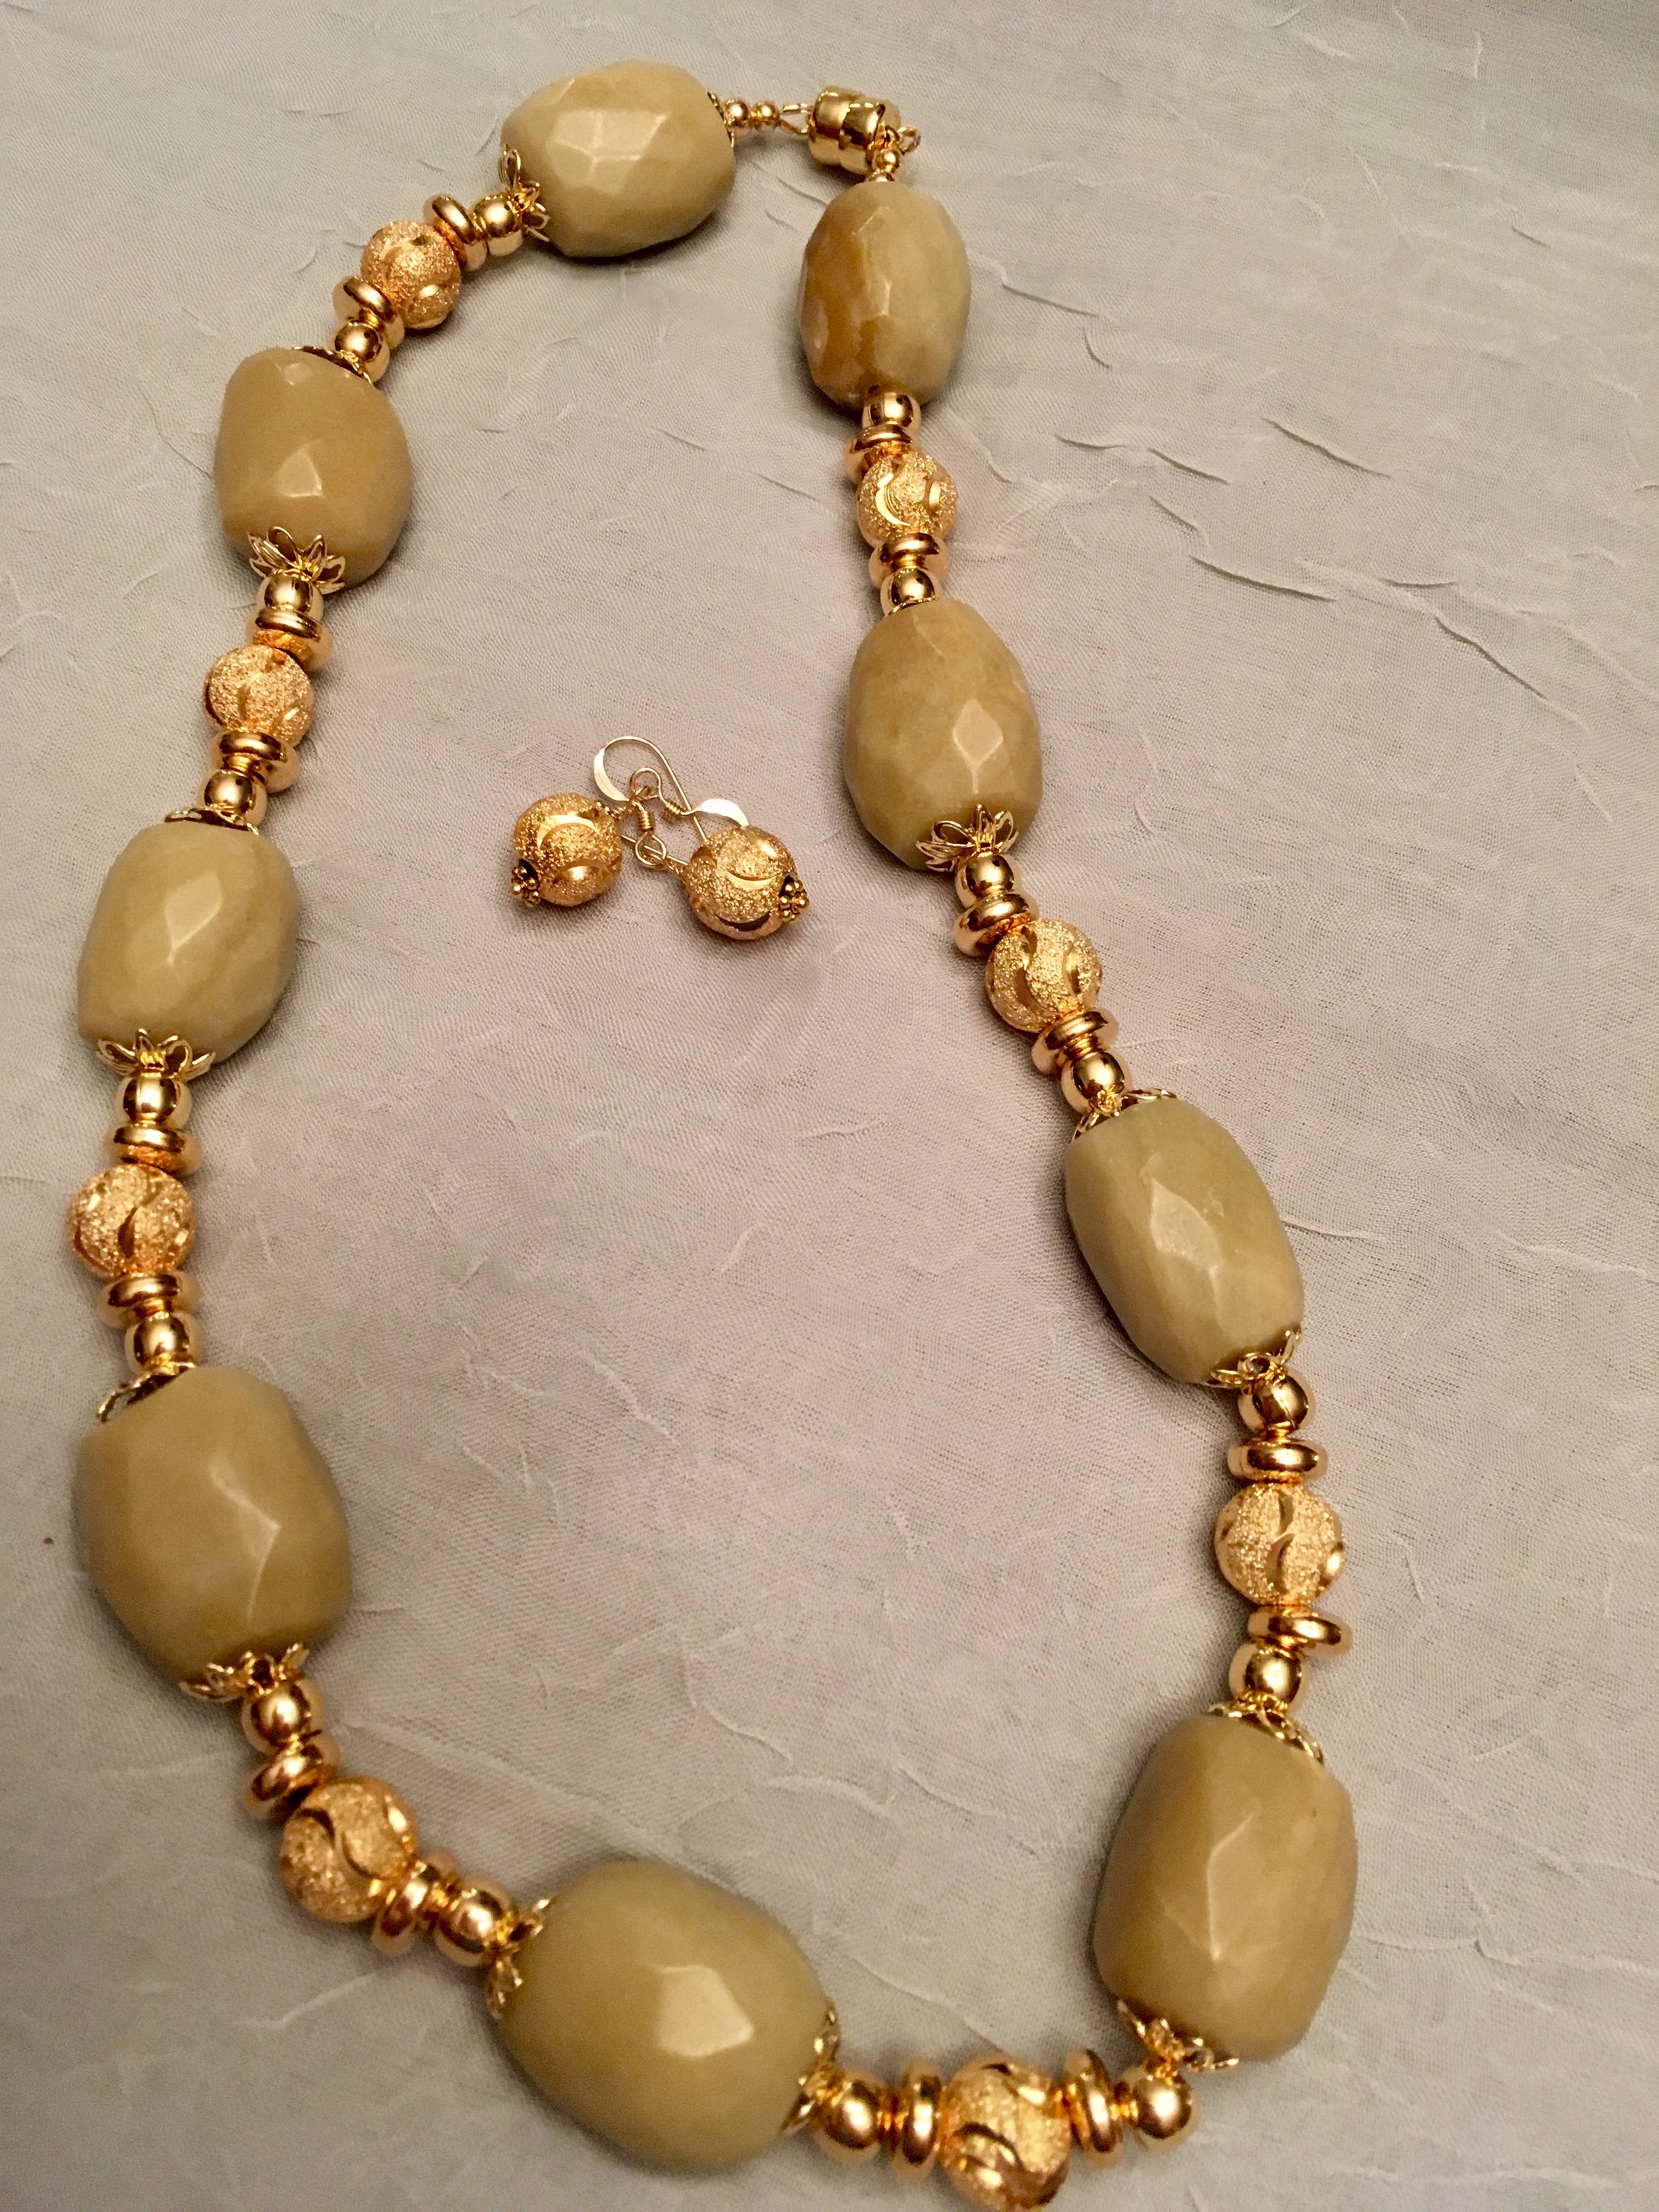 Olive New Jade, 22 Kt. Plated Gold.  19